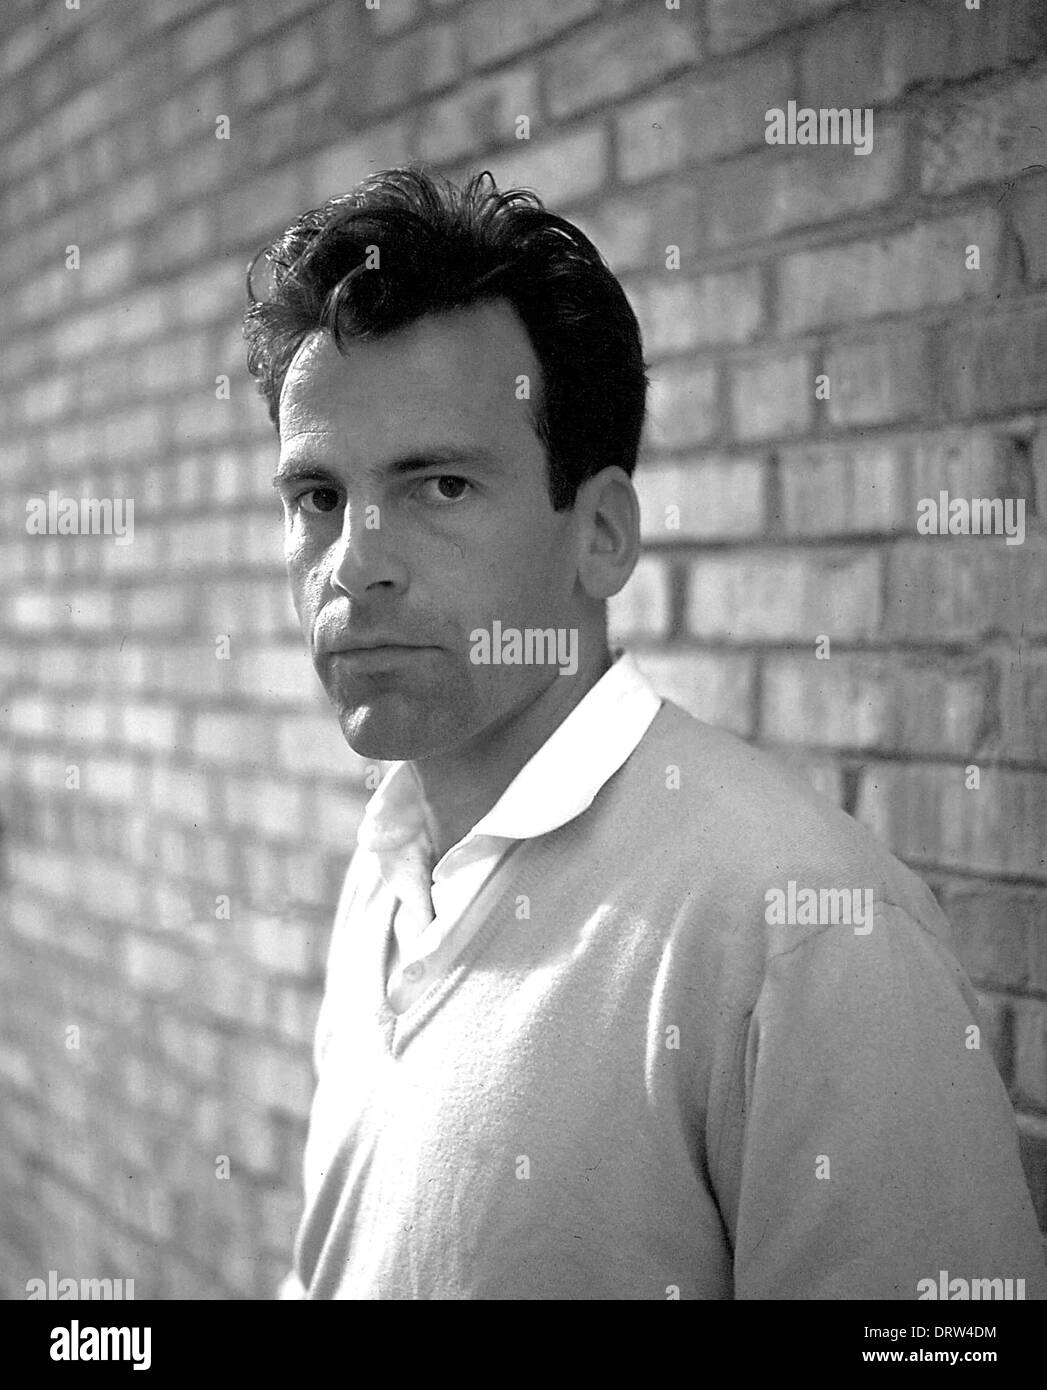 Austrian actor Maximilian Schell, who won the Academy Award for best actor in 1961 for his portrayal of a defense attorney in the drama Judgment at Nuremberg, has died aged 83. The actor's death was announced Saturday by his agent, who said that Schell died overnight at a hospital in Innsbruck following a 'sudden and serious illness'. PICTURED: Date not known - MAXIMILIAN SCHELL. (Credit Image: © Bill Claxton/Globe Photos/ZUMAPRESS.com) Stock Photo